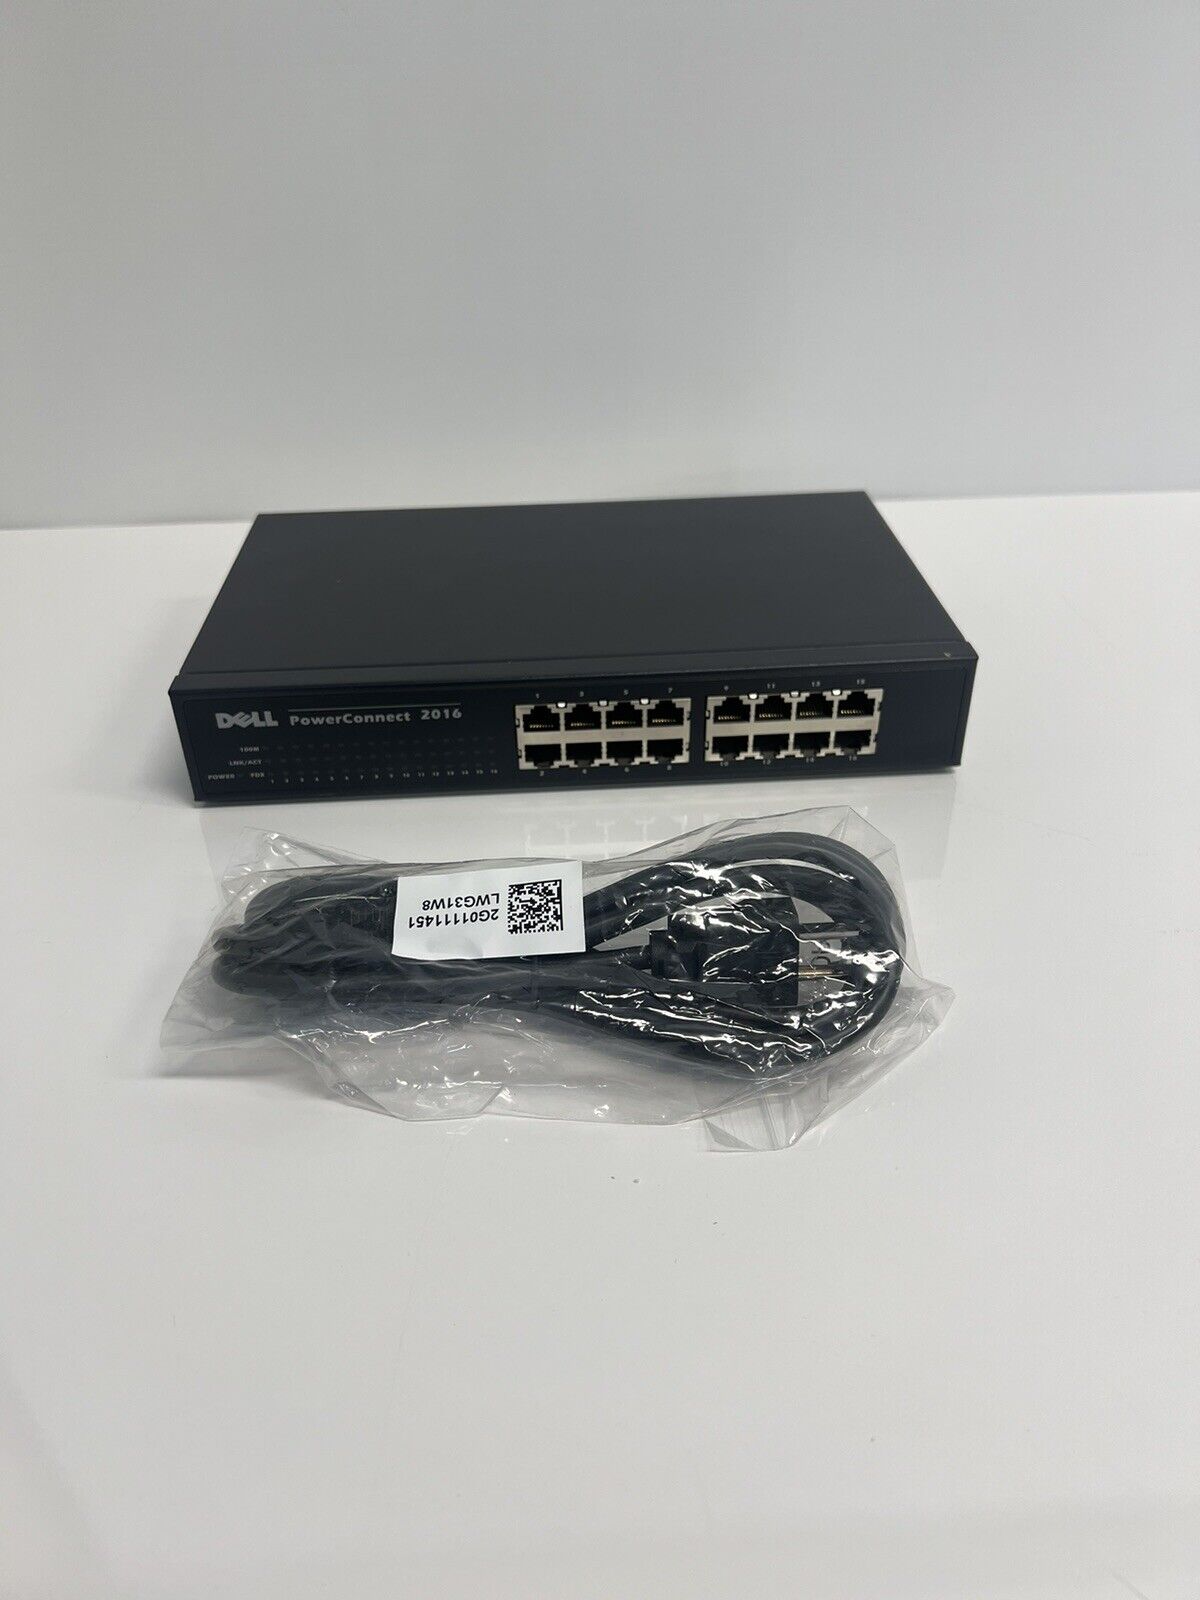 Dell PowerConnect 2016 Ethernet Switch